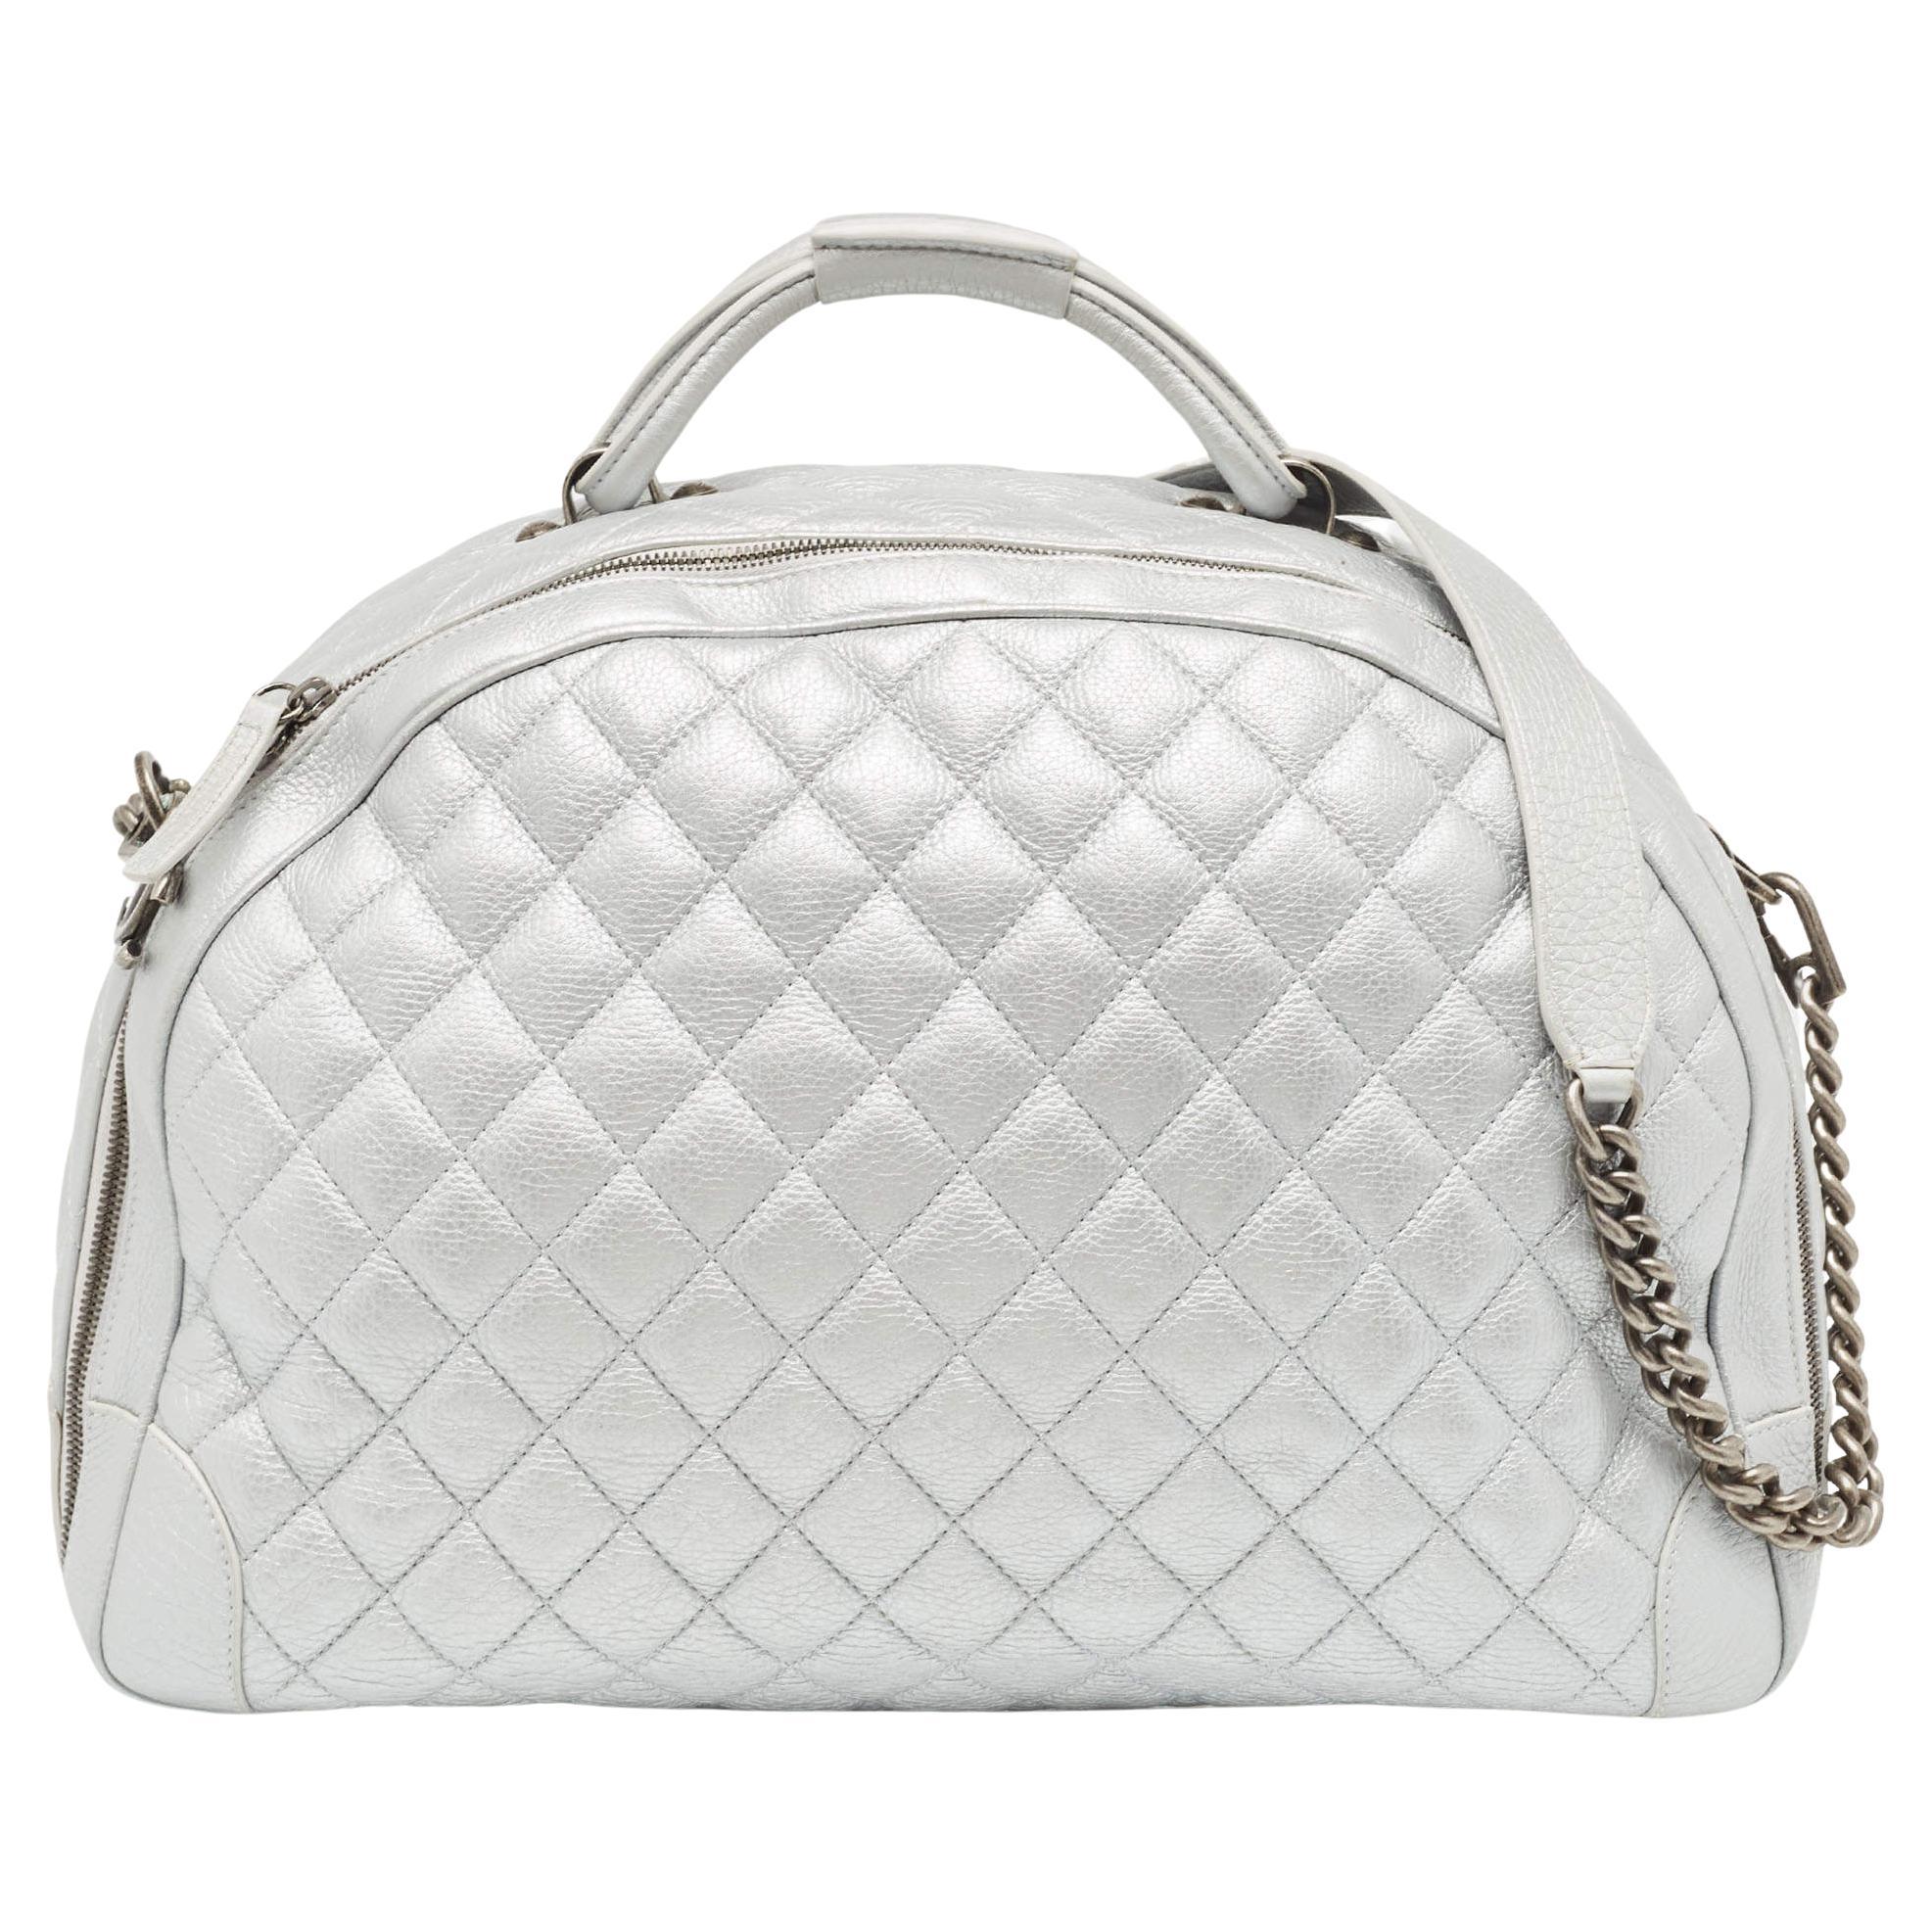 Chanel Metallic Grey Quilted Leather Airlines Round Trip Bowler Bag For Sale